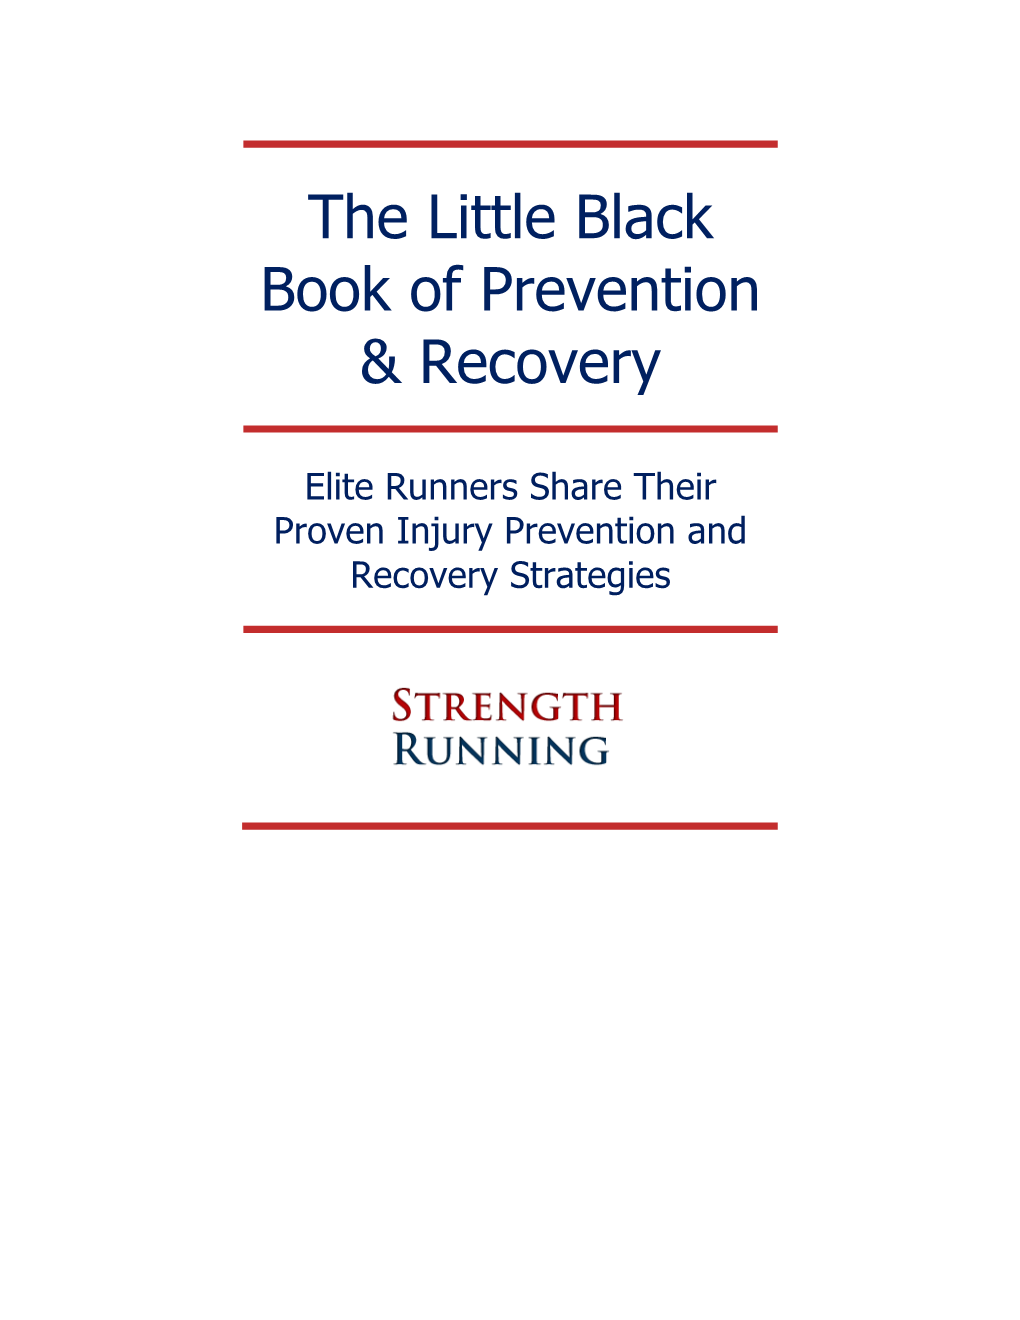 The Little Black Book of Prevention & Recovery